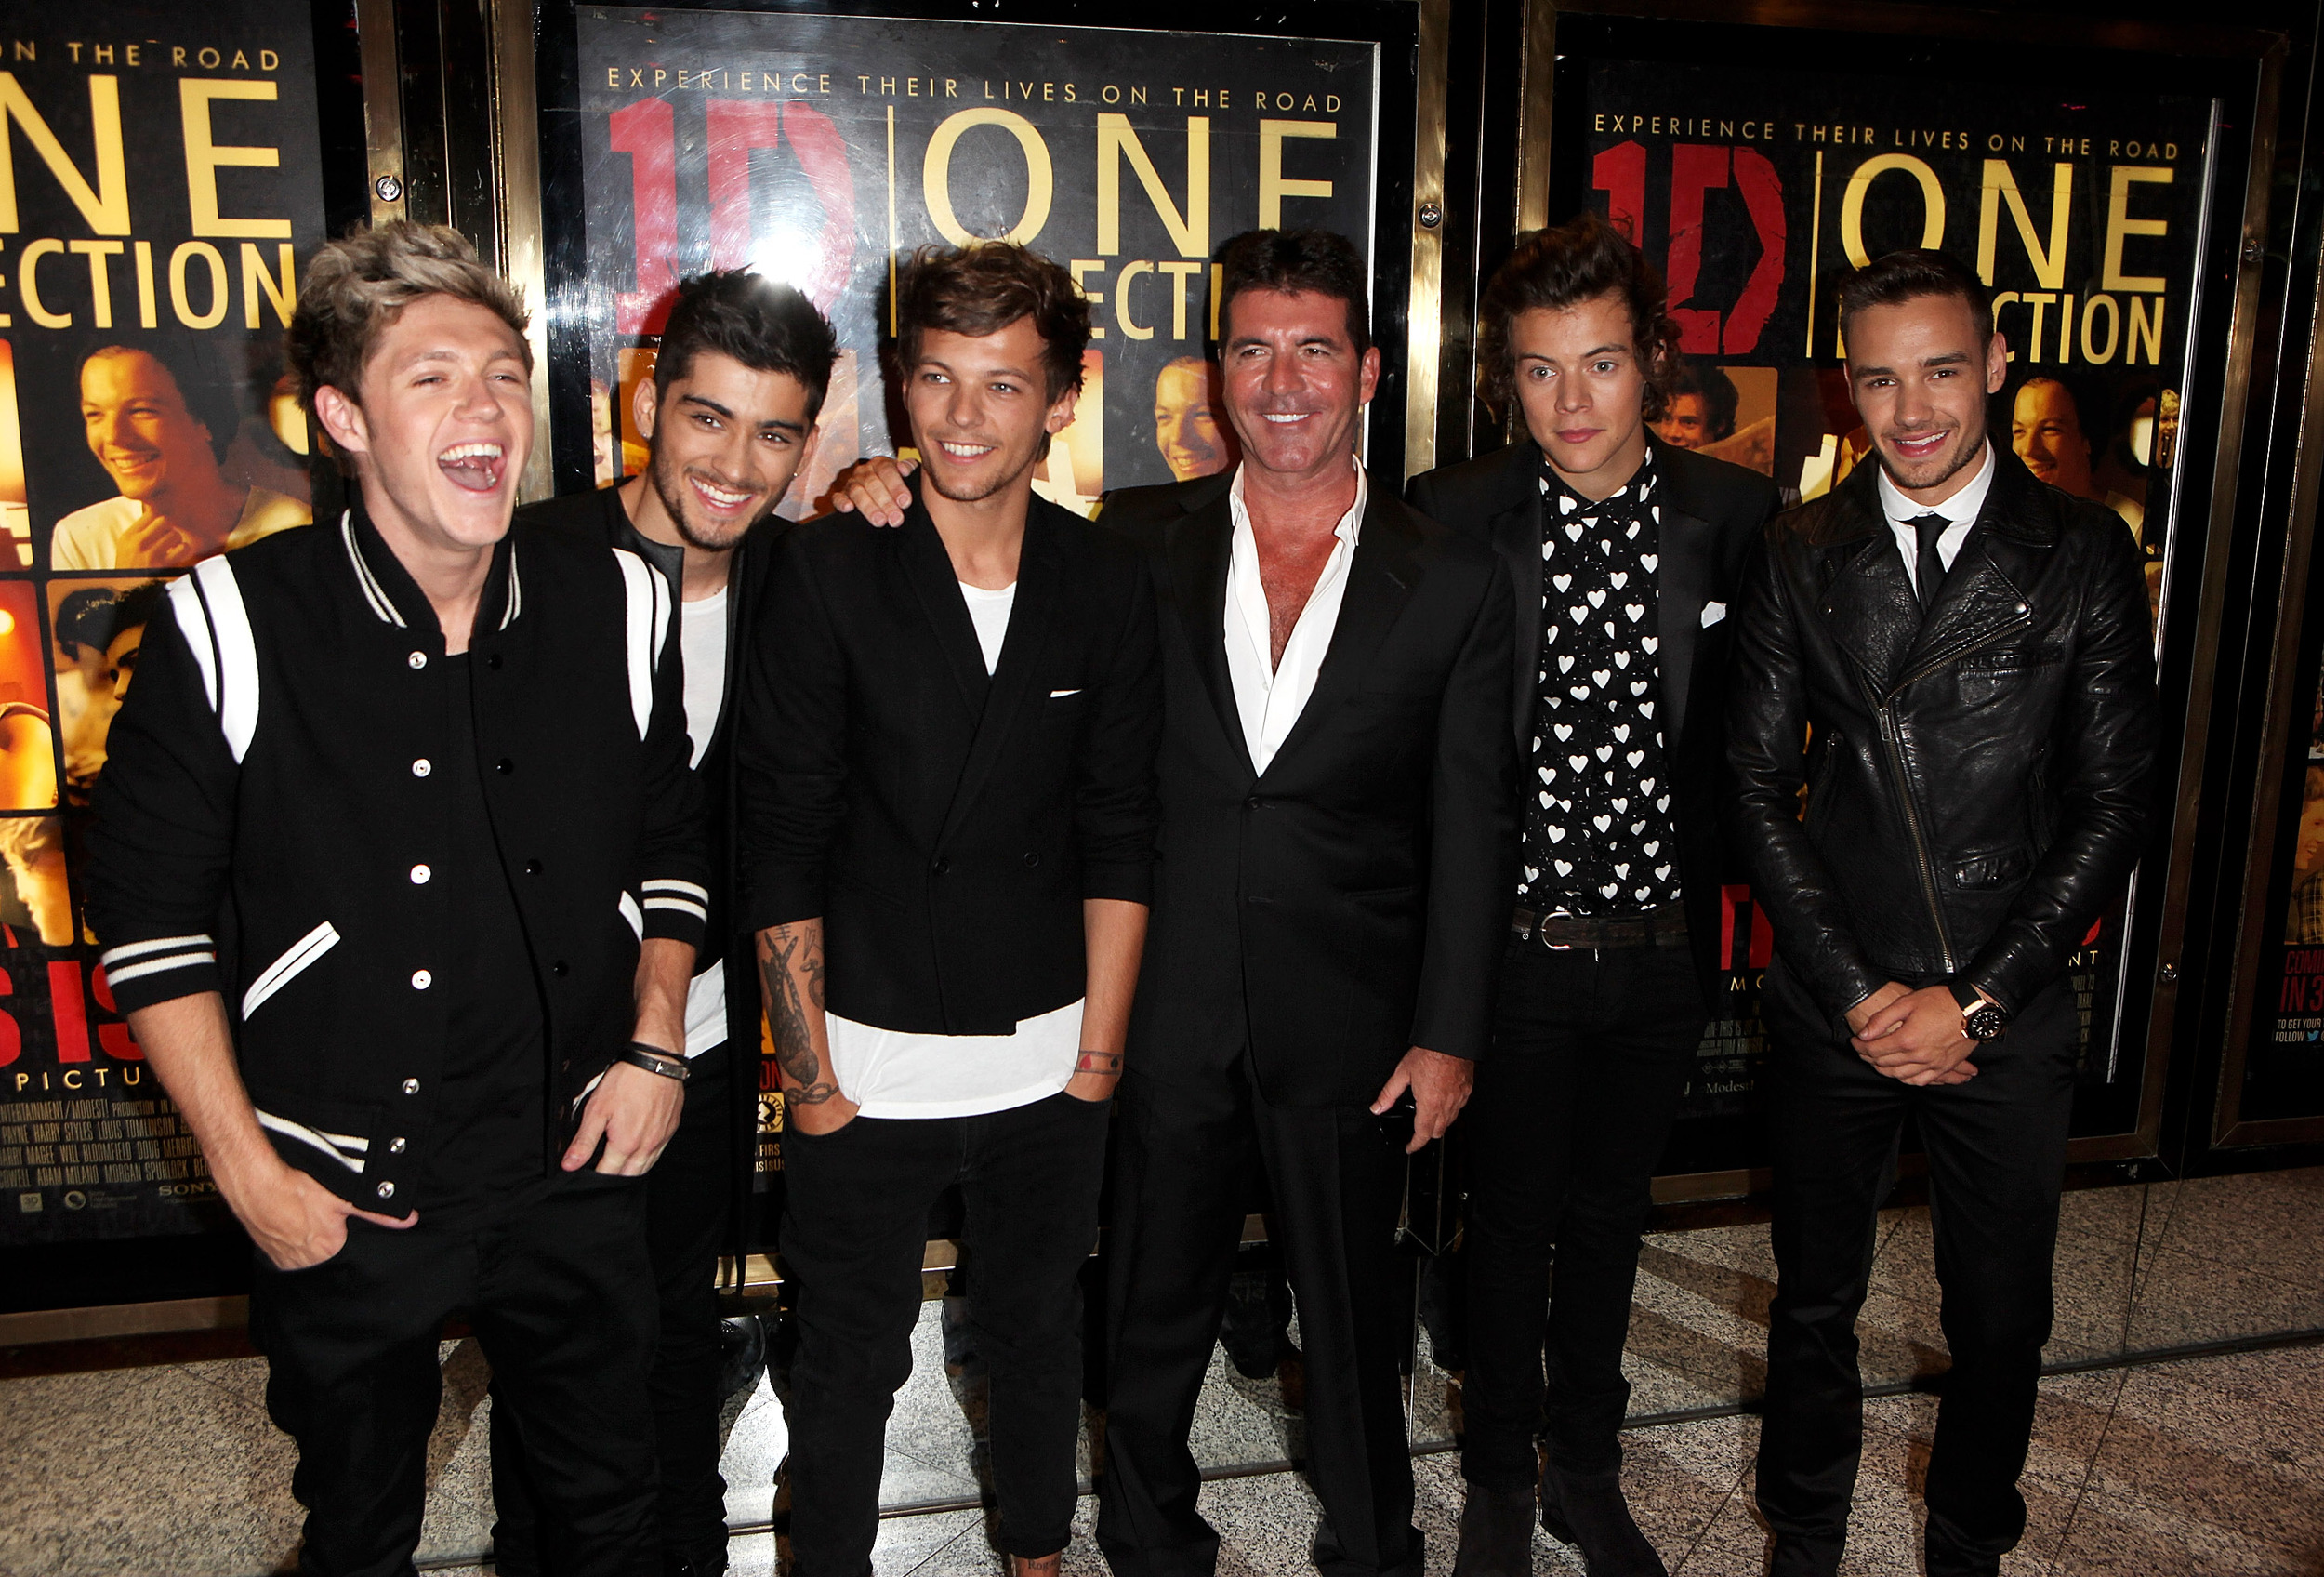 One Direction: This Is Us #1